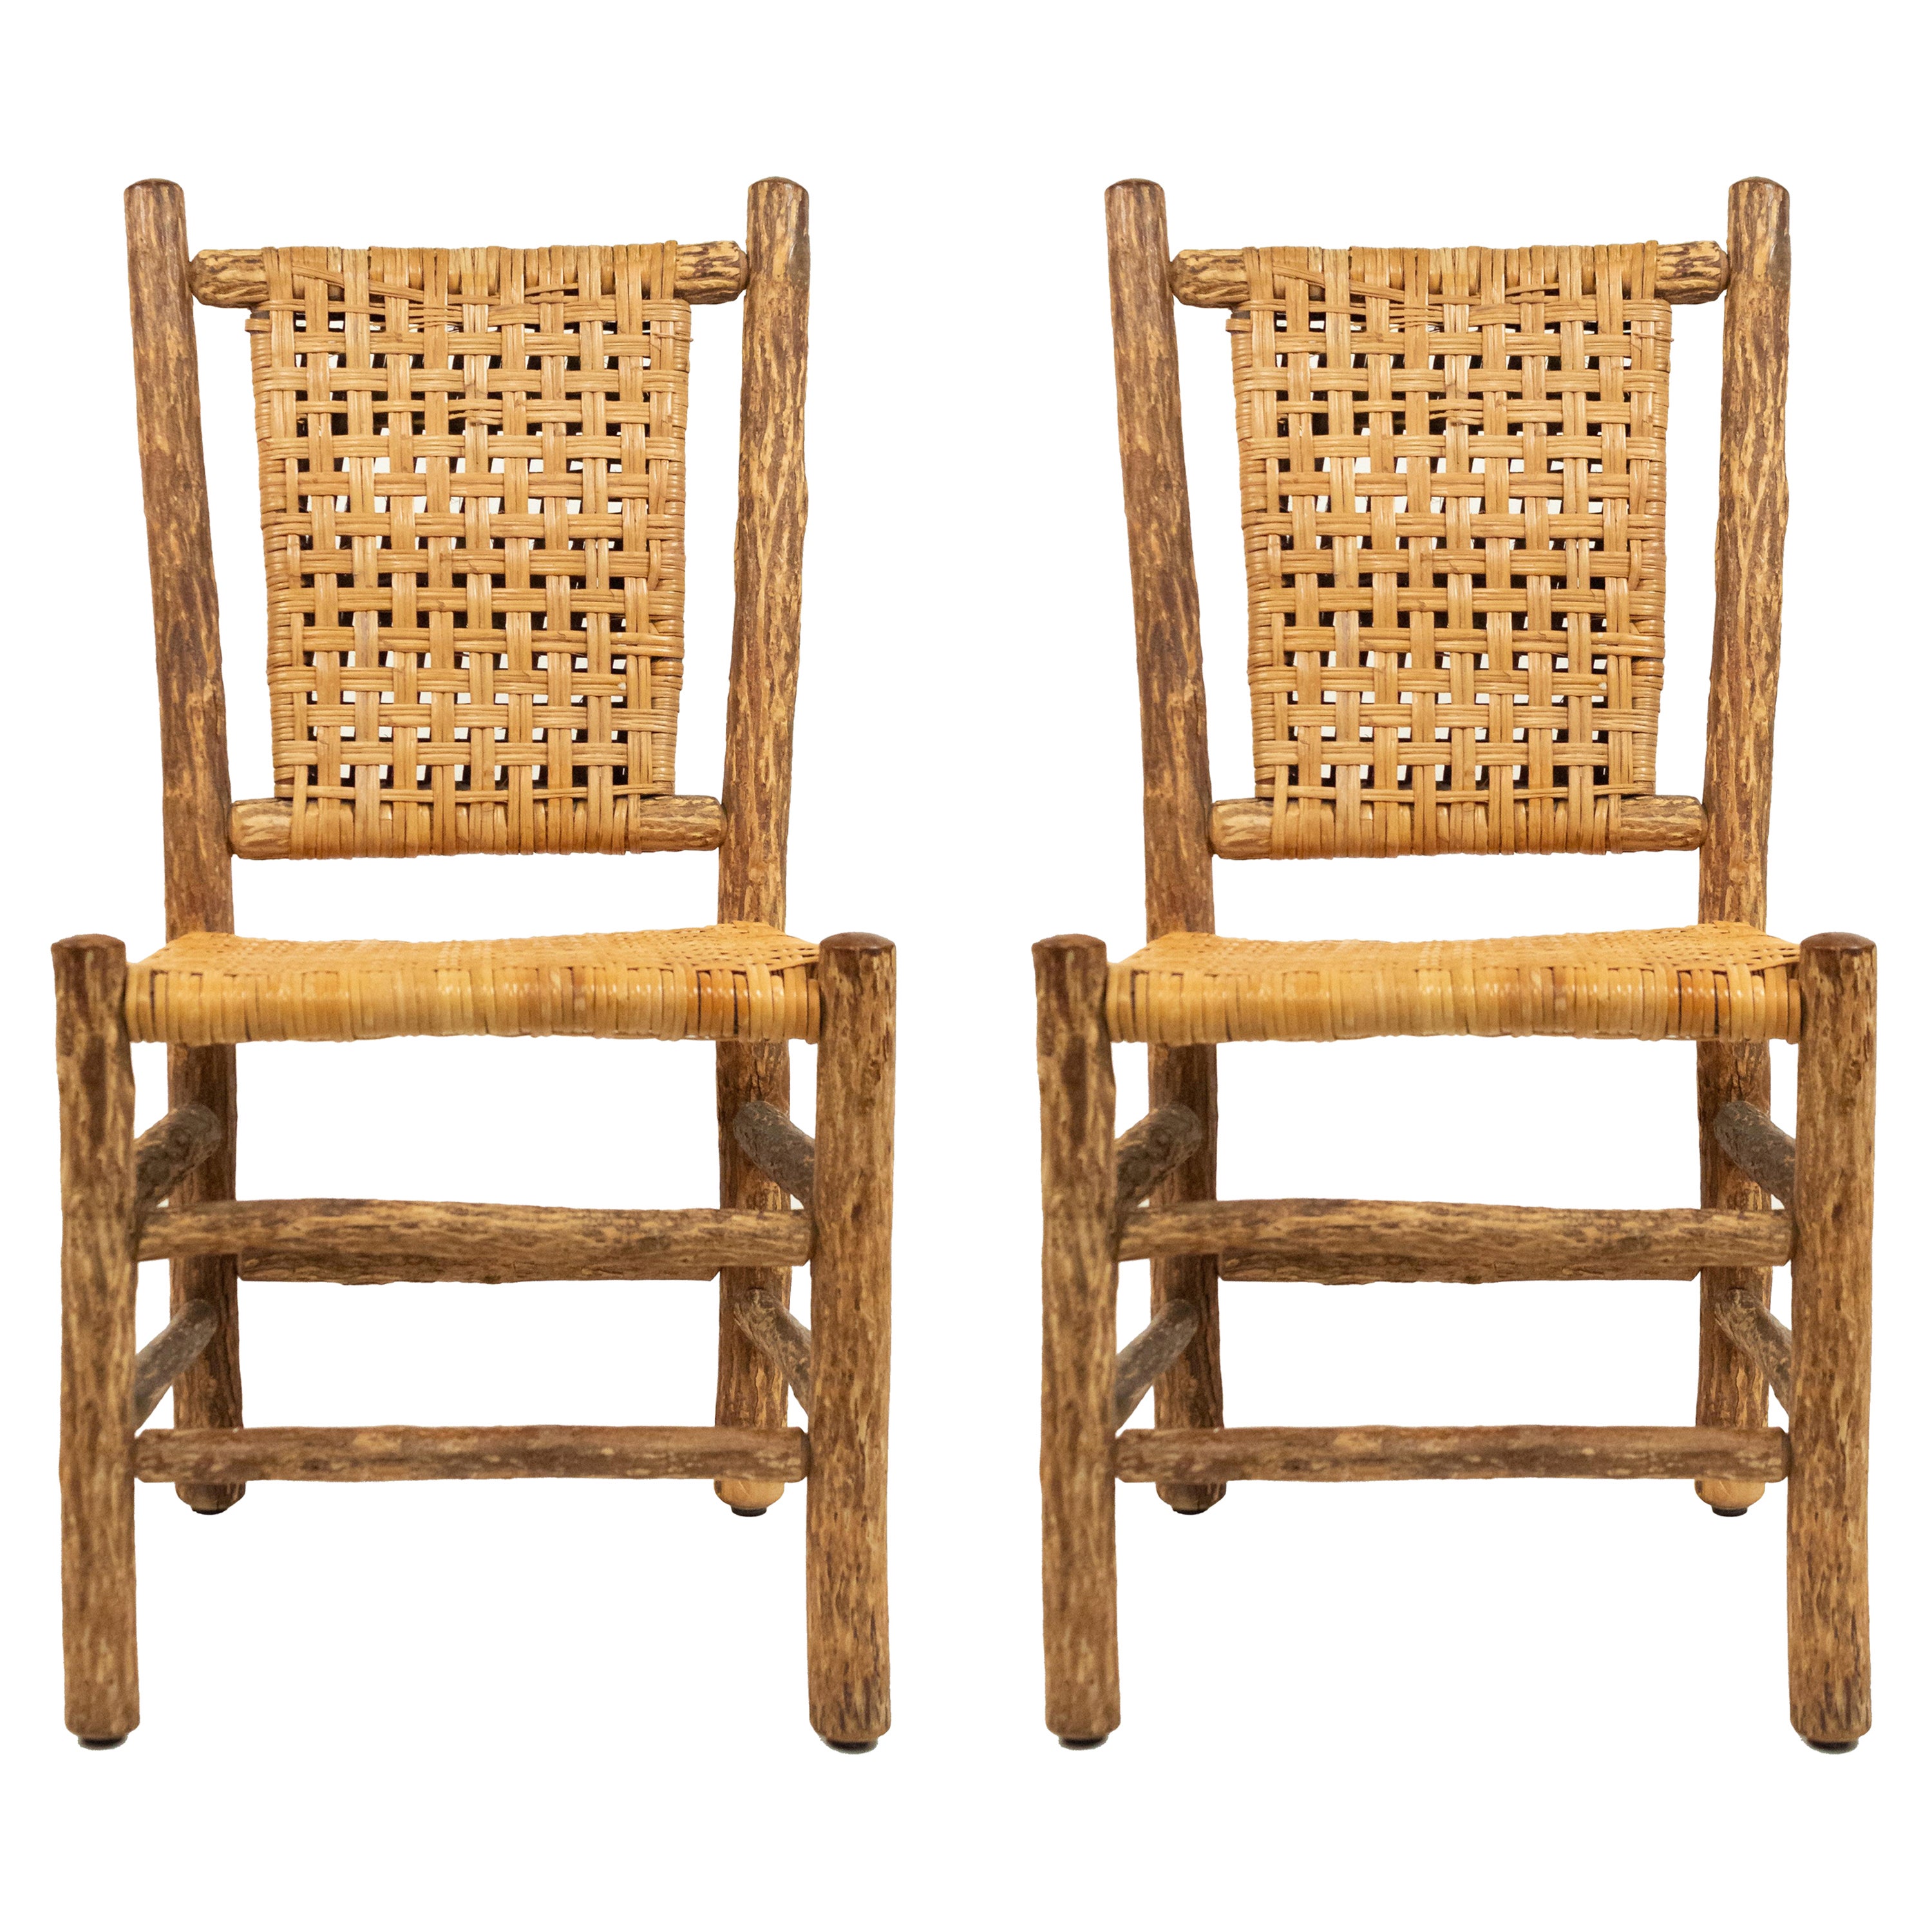 Pair of Rustic Hickory Side Chairs with Cane Seats